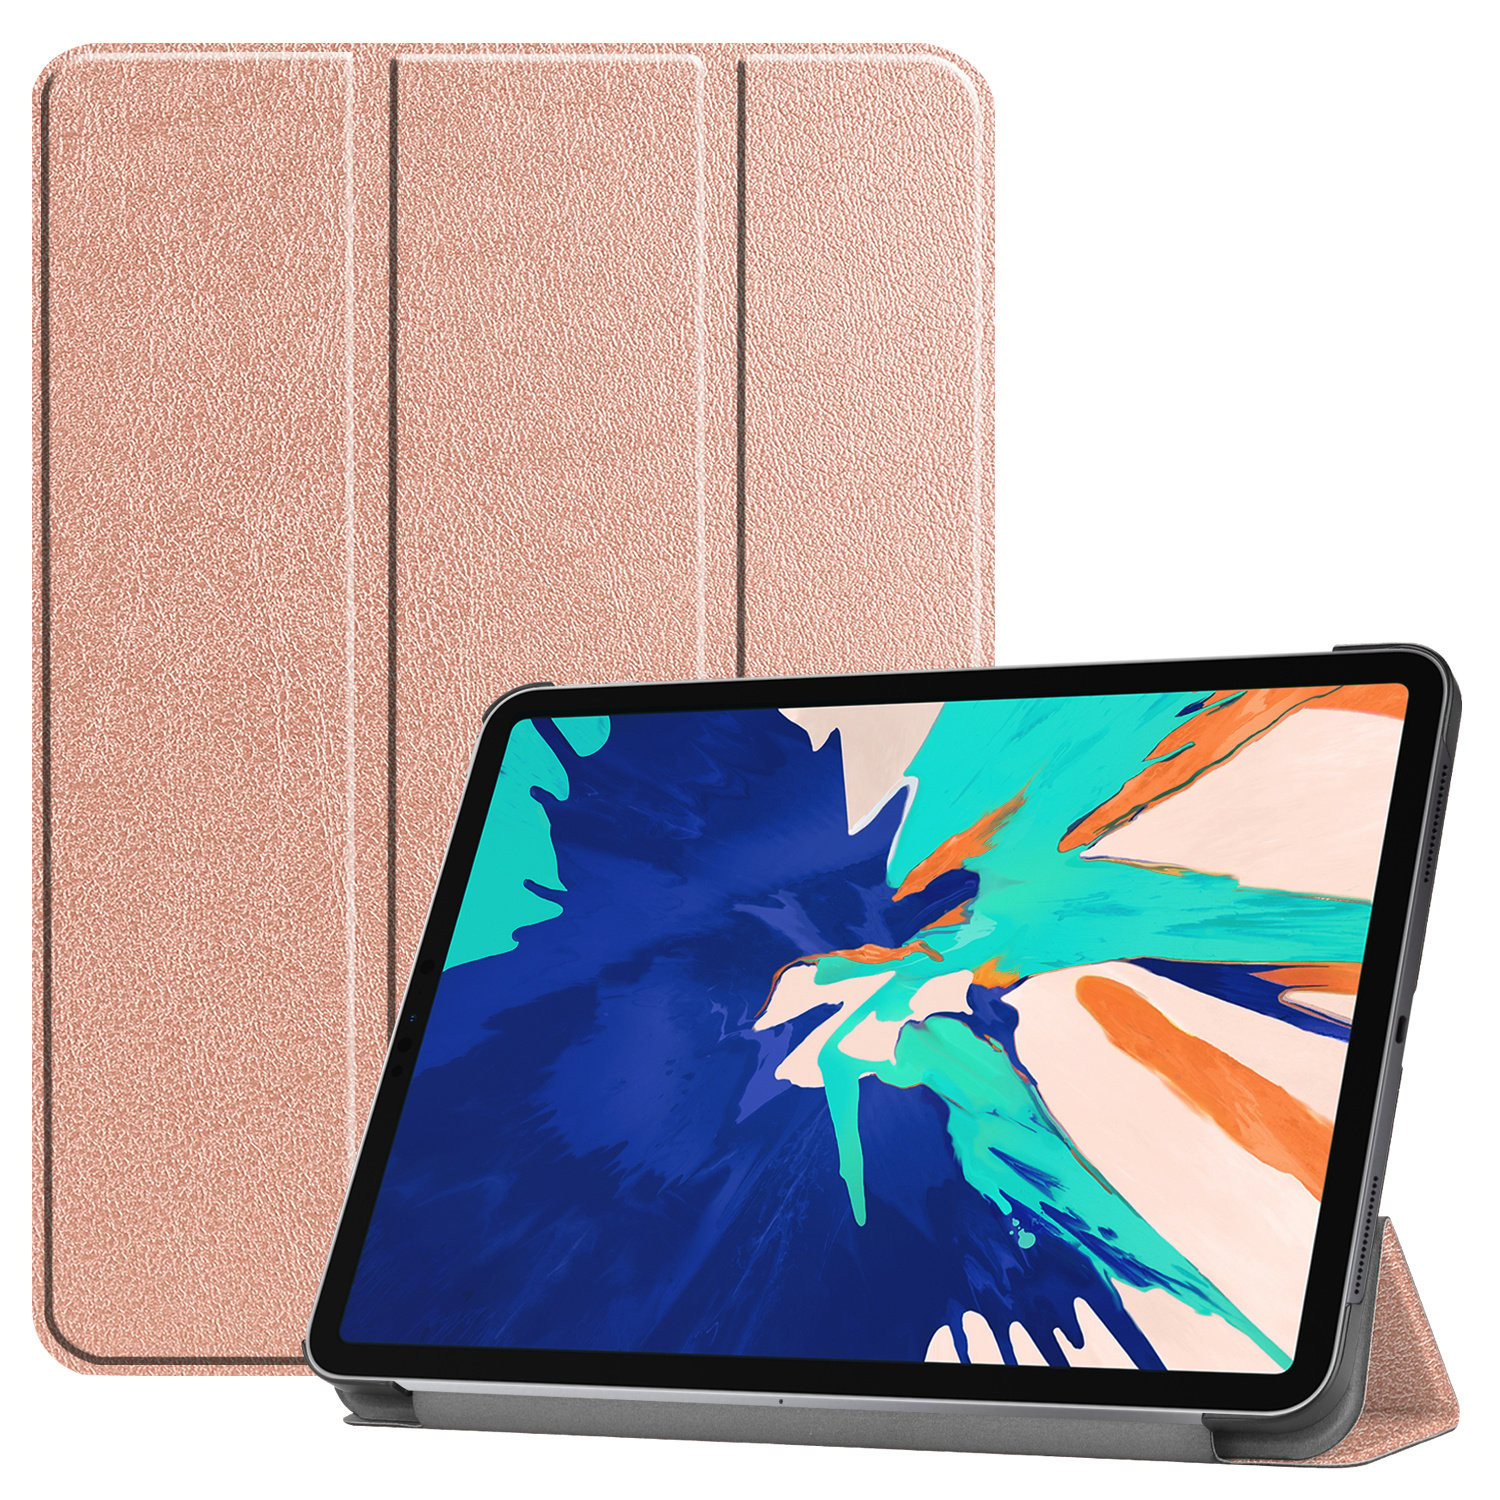 3-Vouw sleepcover hoes - iPad Pro 12.9 inch (2018-2019) - Rose Goud